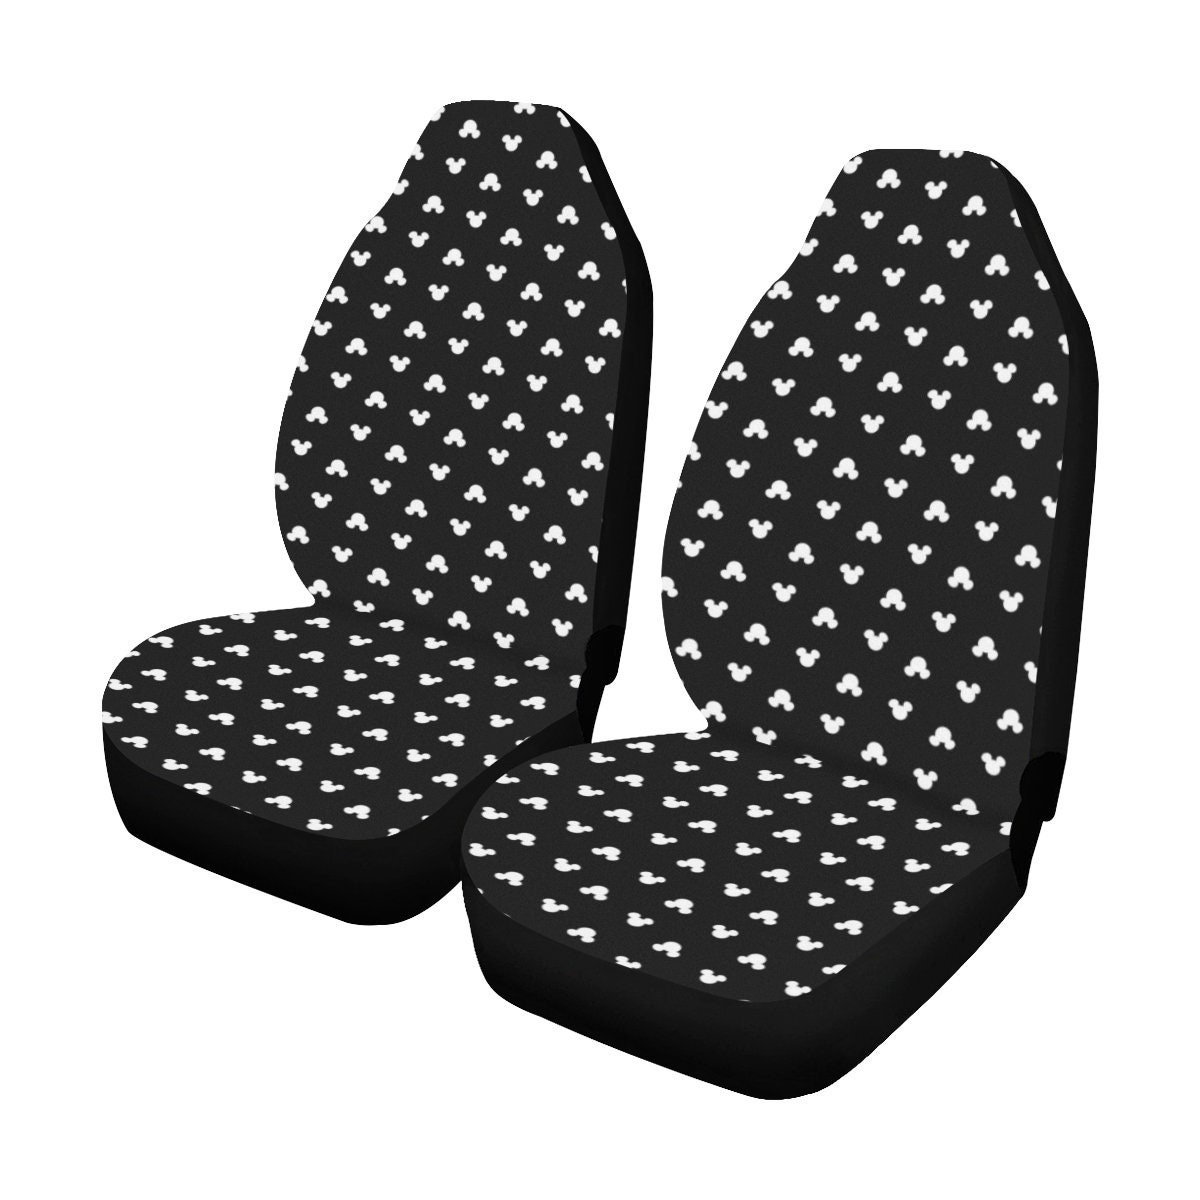 Mickey Mouse Car Seat Covers | Mickey Mouse Car Accessory | Disney Car Seat Covers